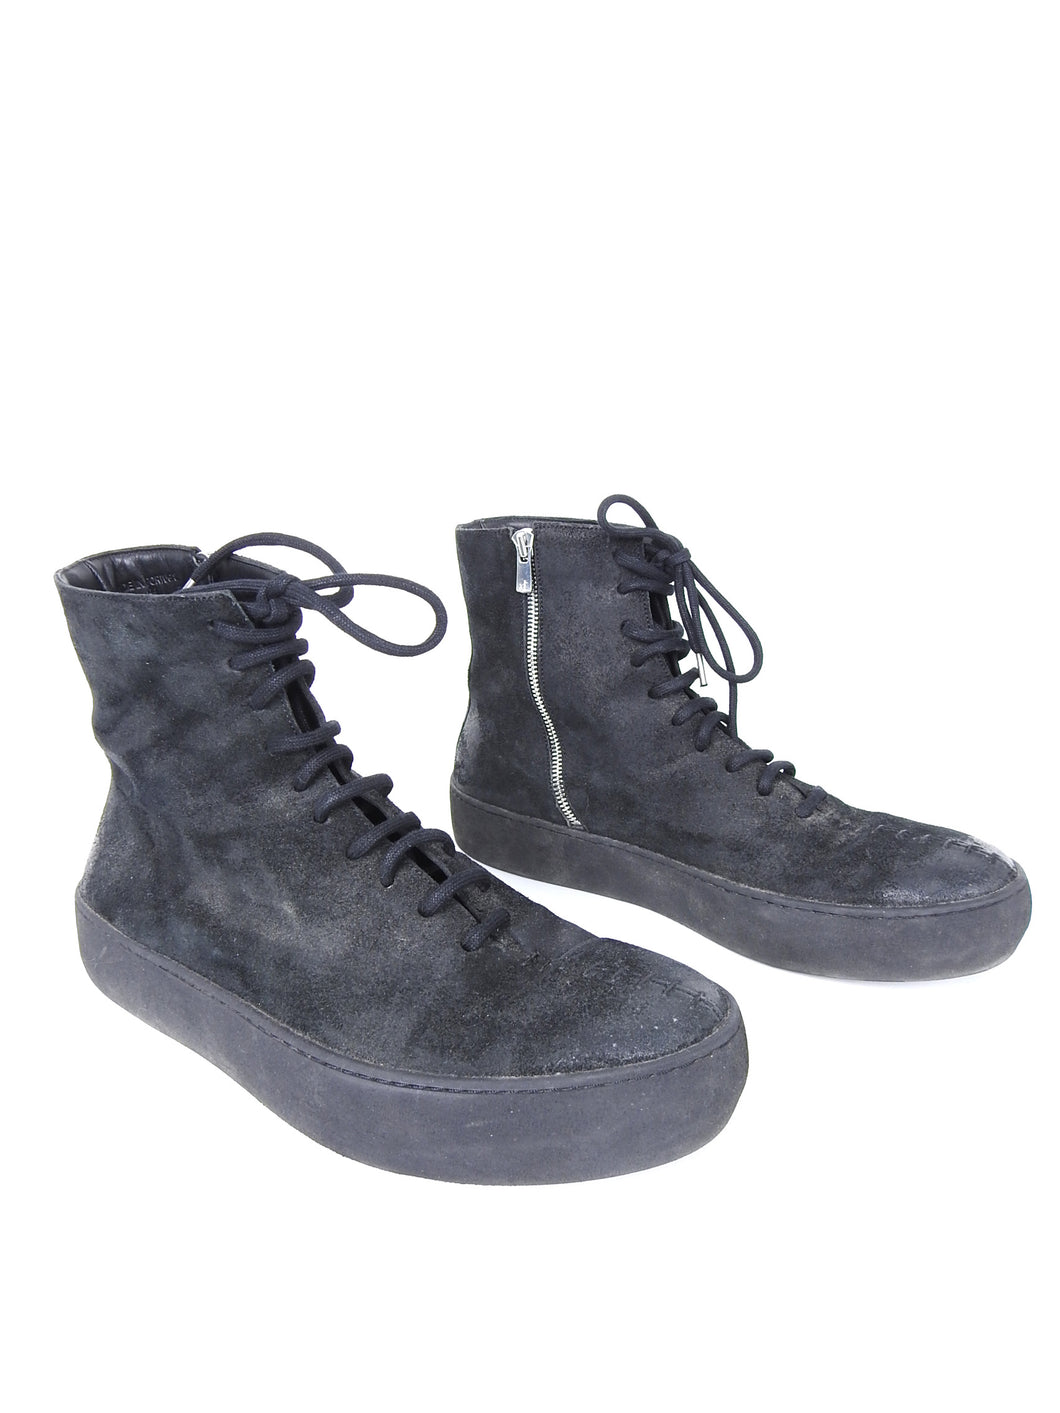 The Last Conspiracy Black Waxed Suede Side Zip Lace Up High Top Sneaker